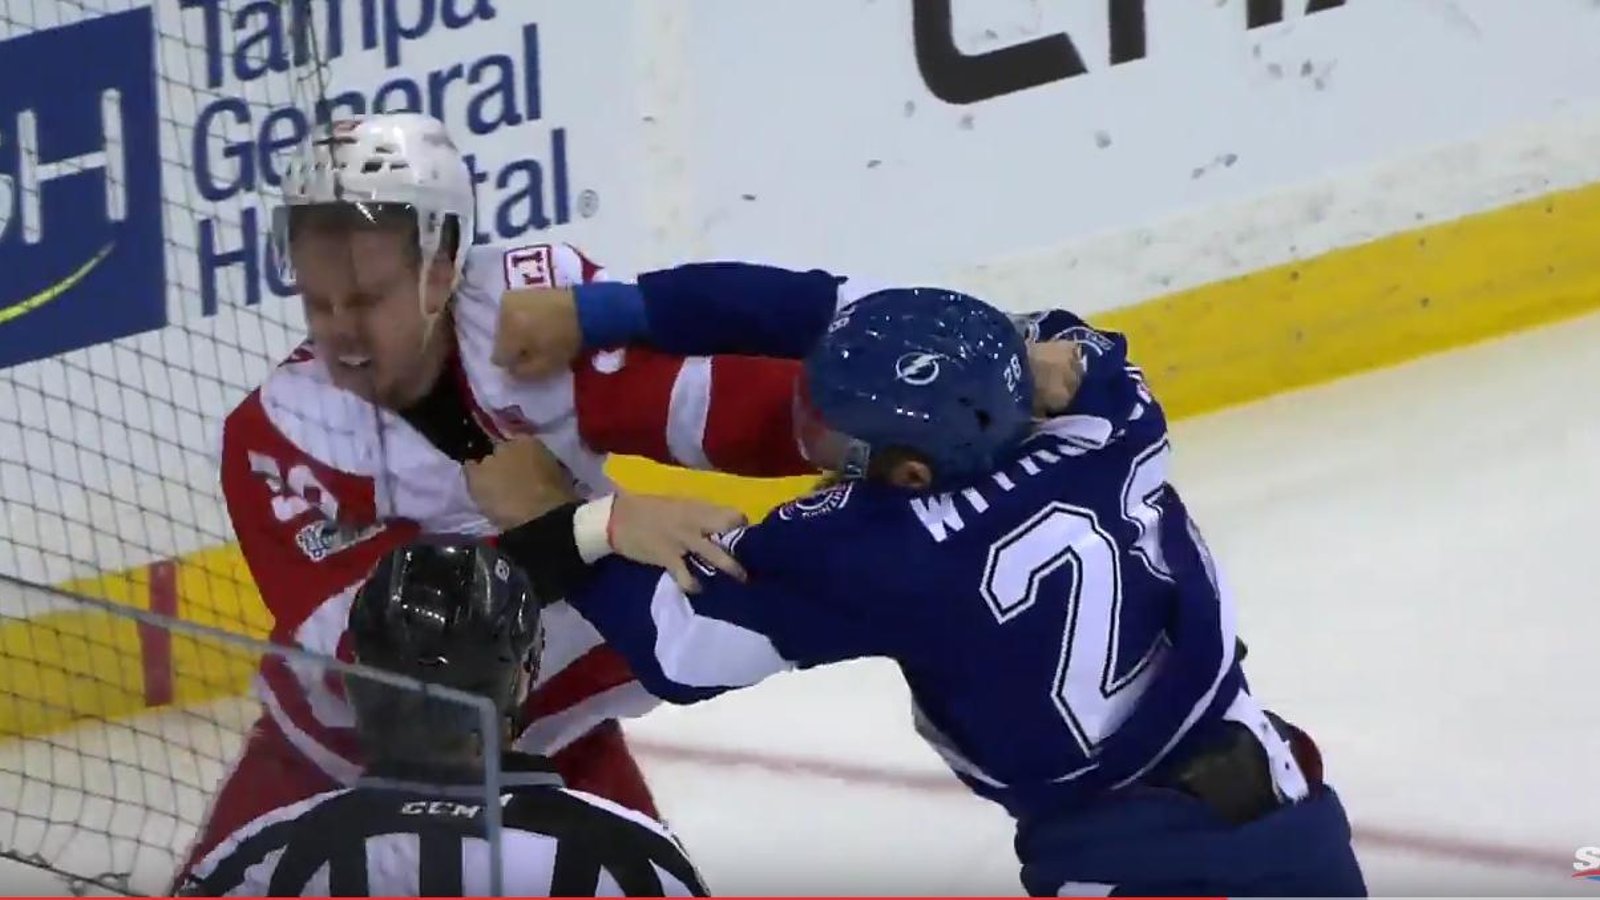 BREAKING : Anthony Mantha out for the season after intense fight! 